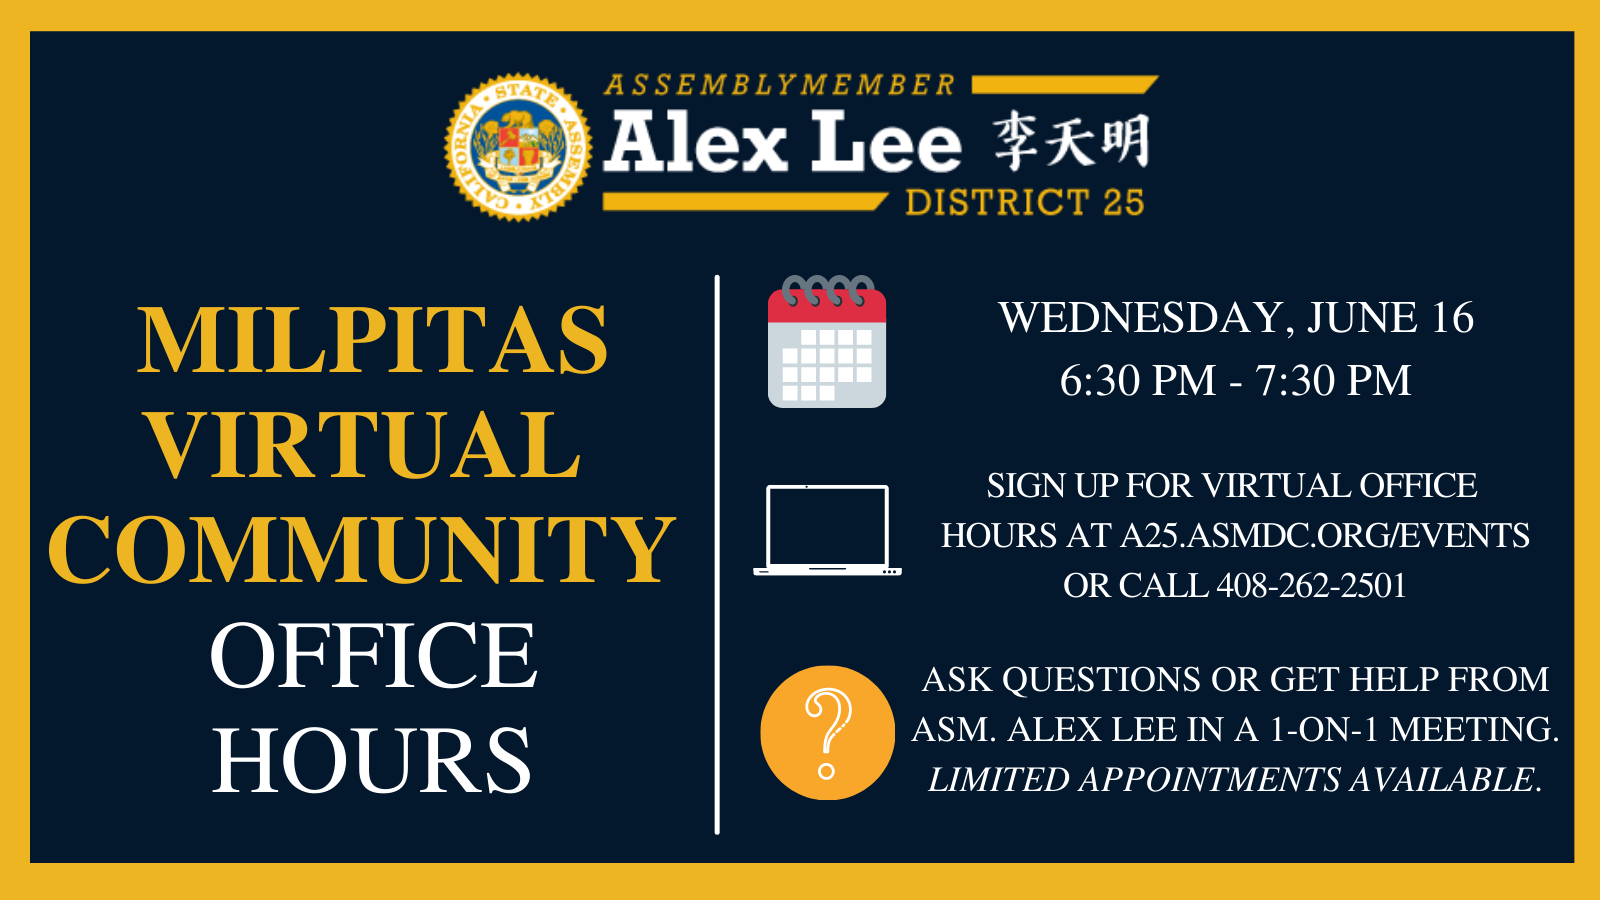 Milpitas Virtual Community Office Hours